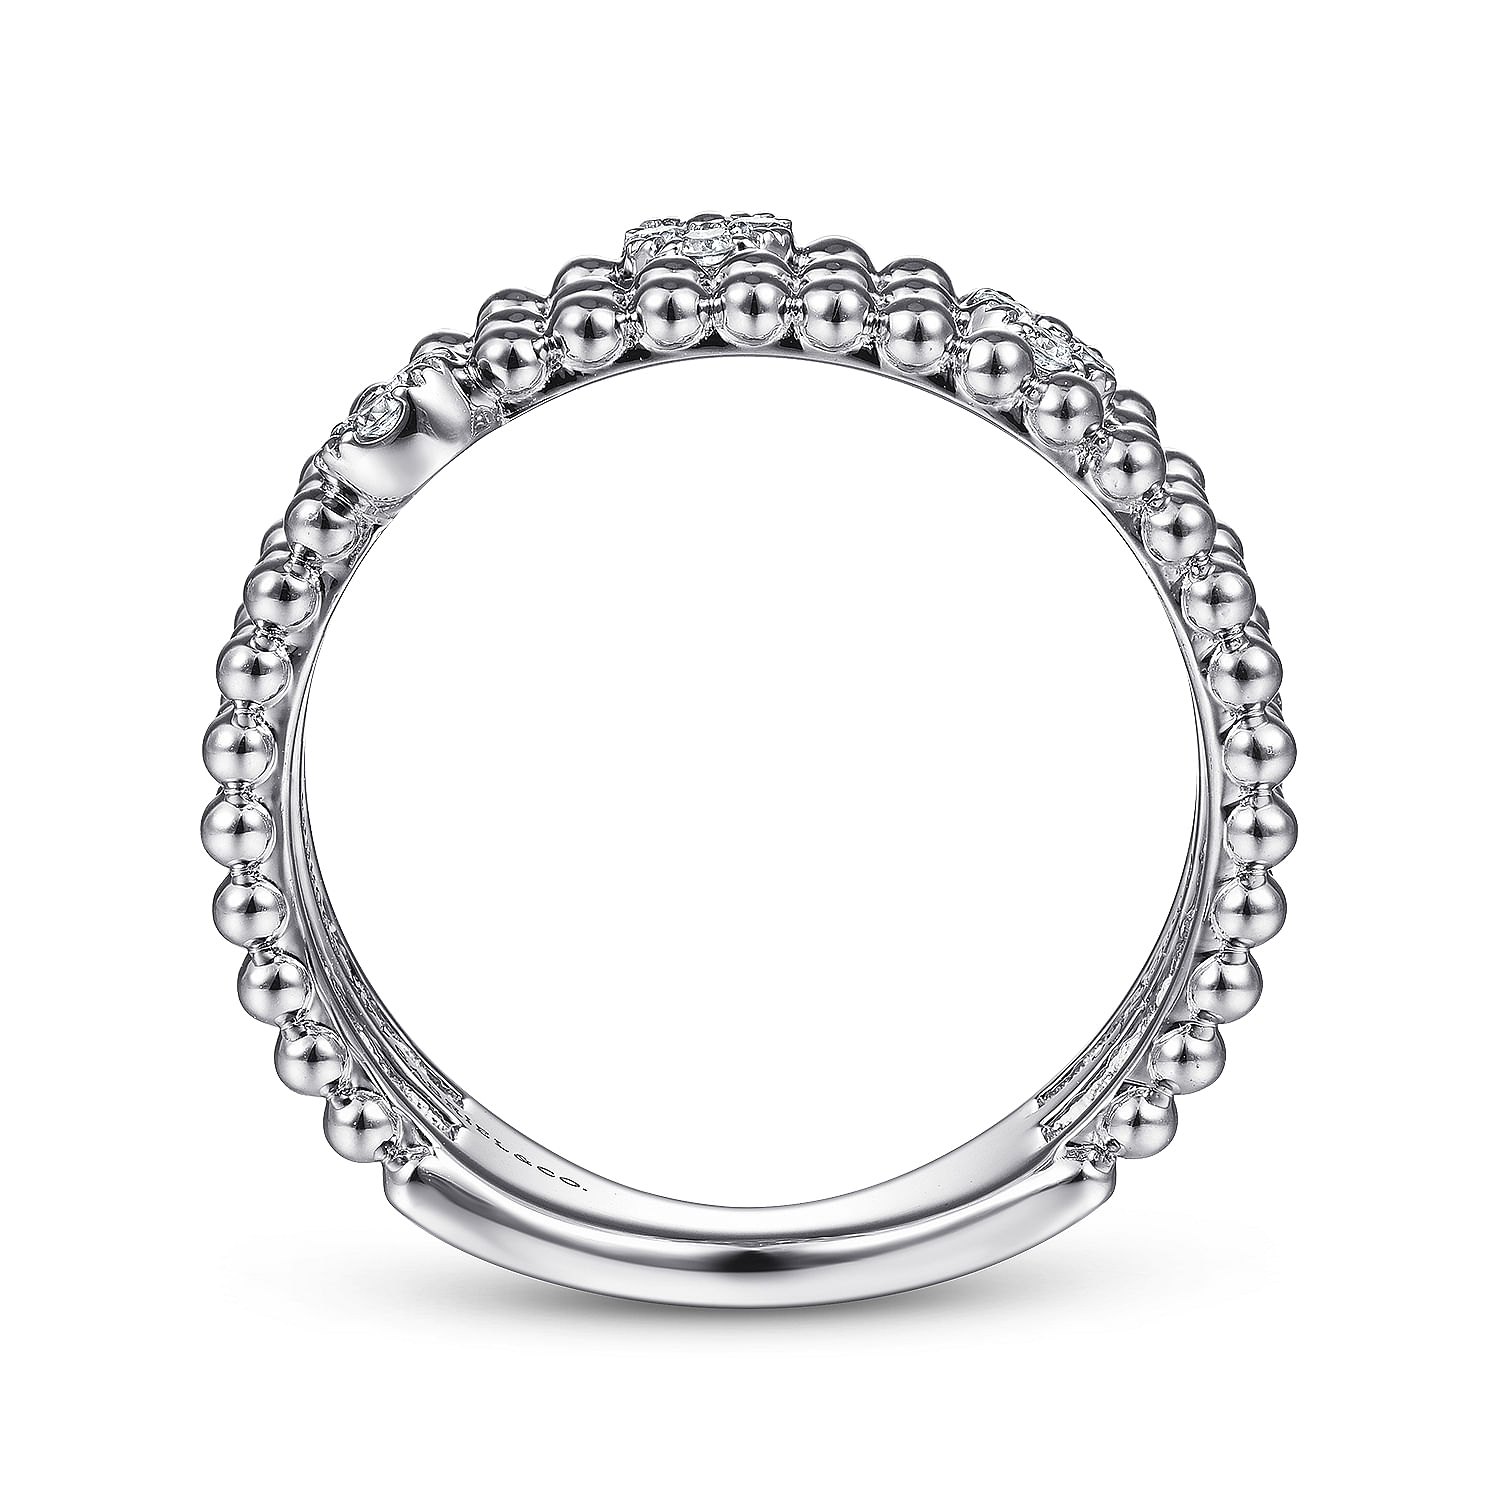 14K White Gold Three Row Beaded Ring with Pavé Diamond Cluster Stations